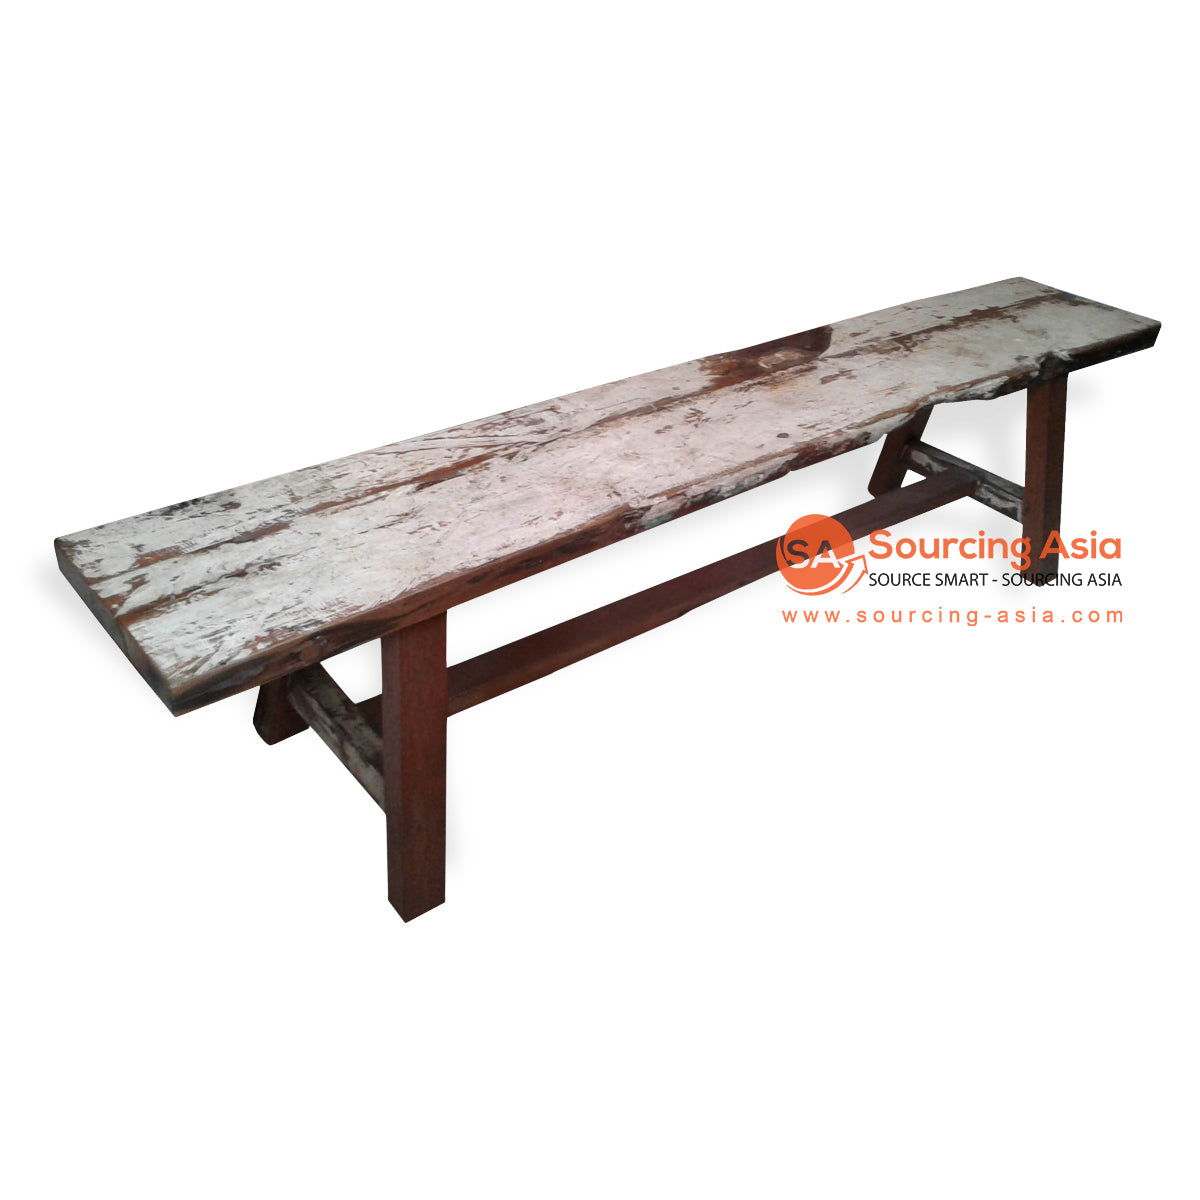 KPL070 NATURAL RECYCLED BOAT WOOD RETRO BENCH